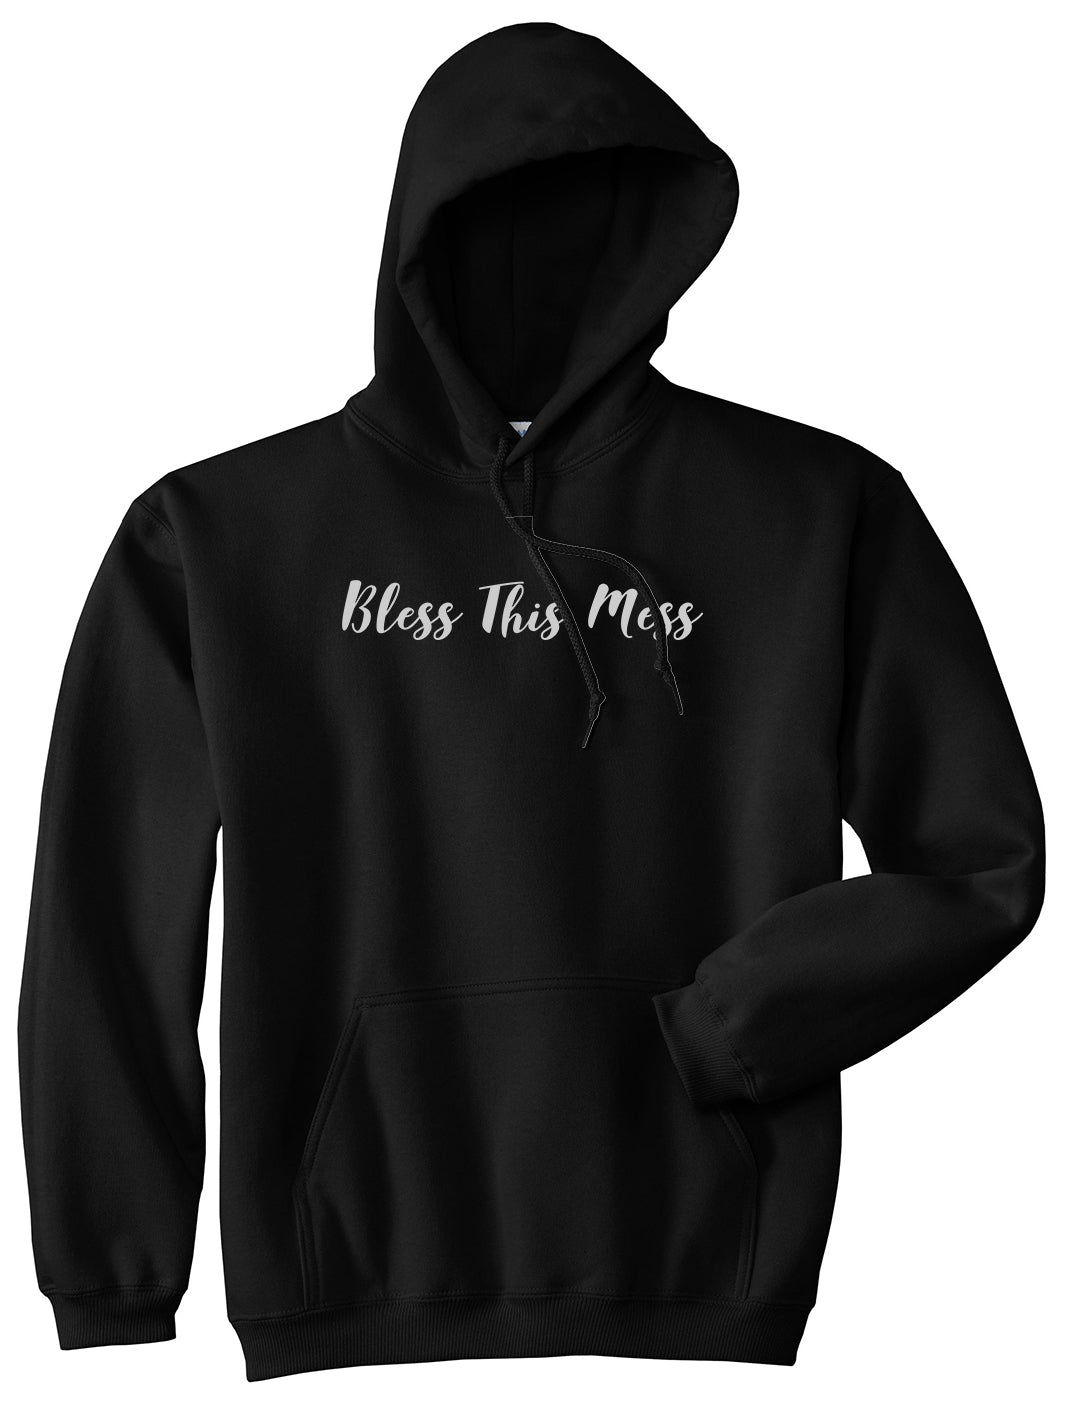 Bless This Mess Black Pullover Hoodie by Kings Of NY